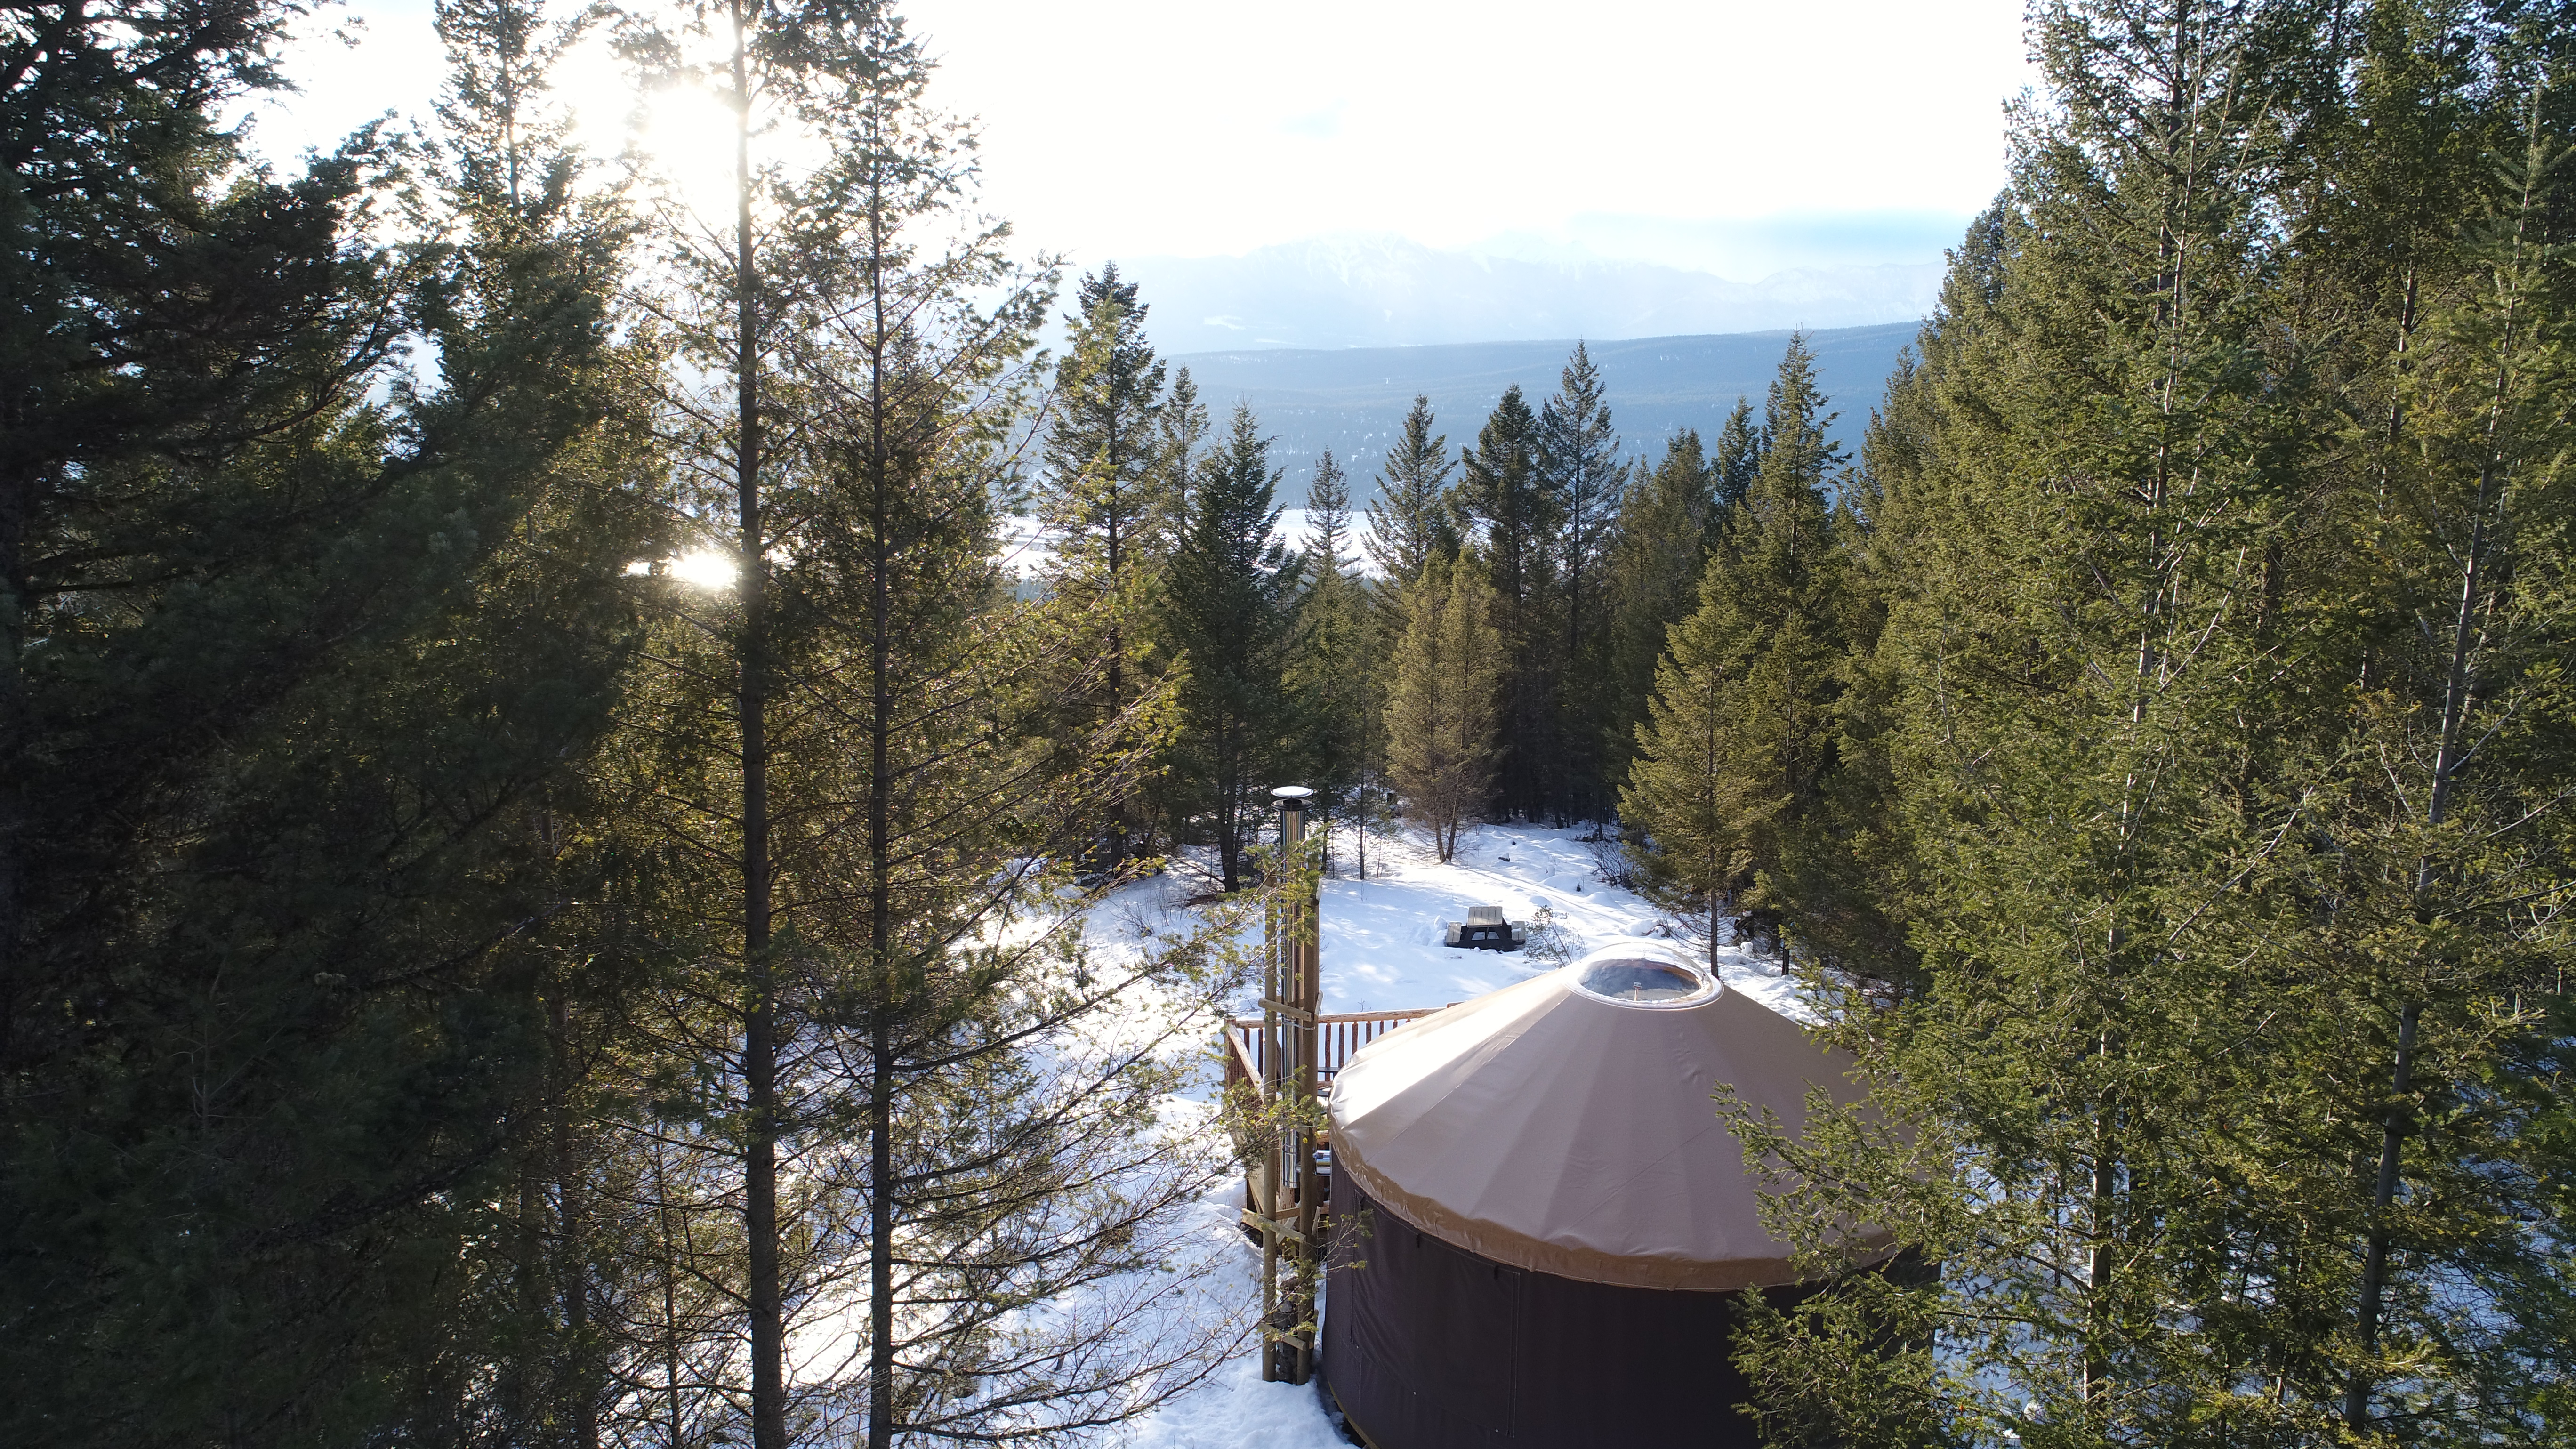 A Yurt surrounded by evergreen trees in the Kootenay Rockies. Snow covers the ground.